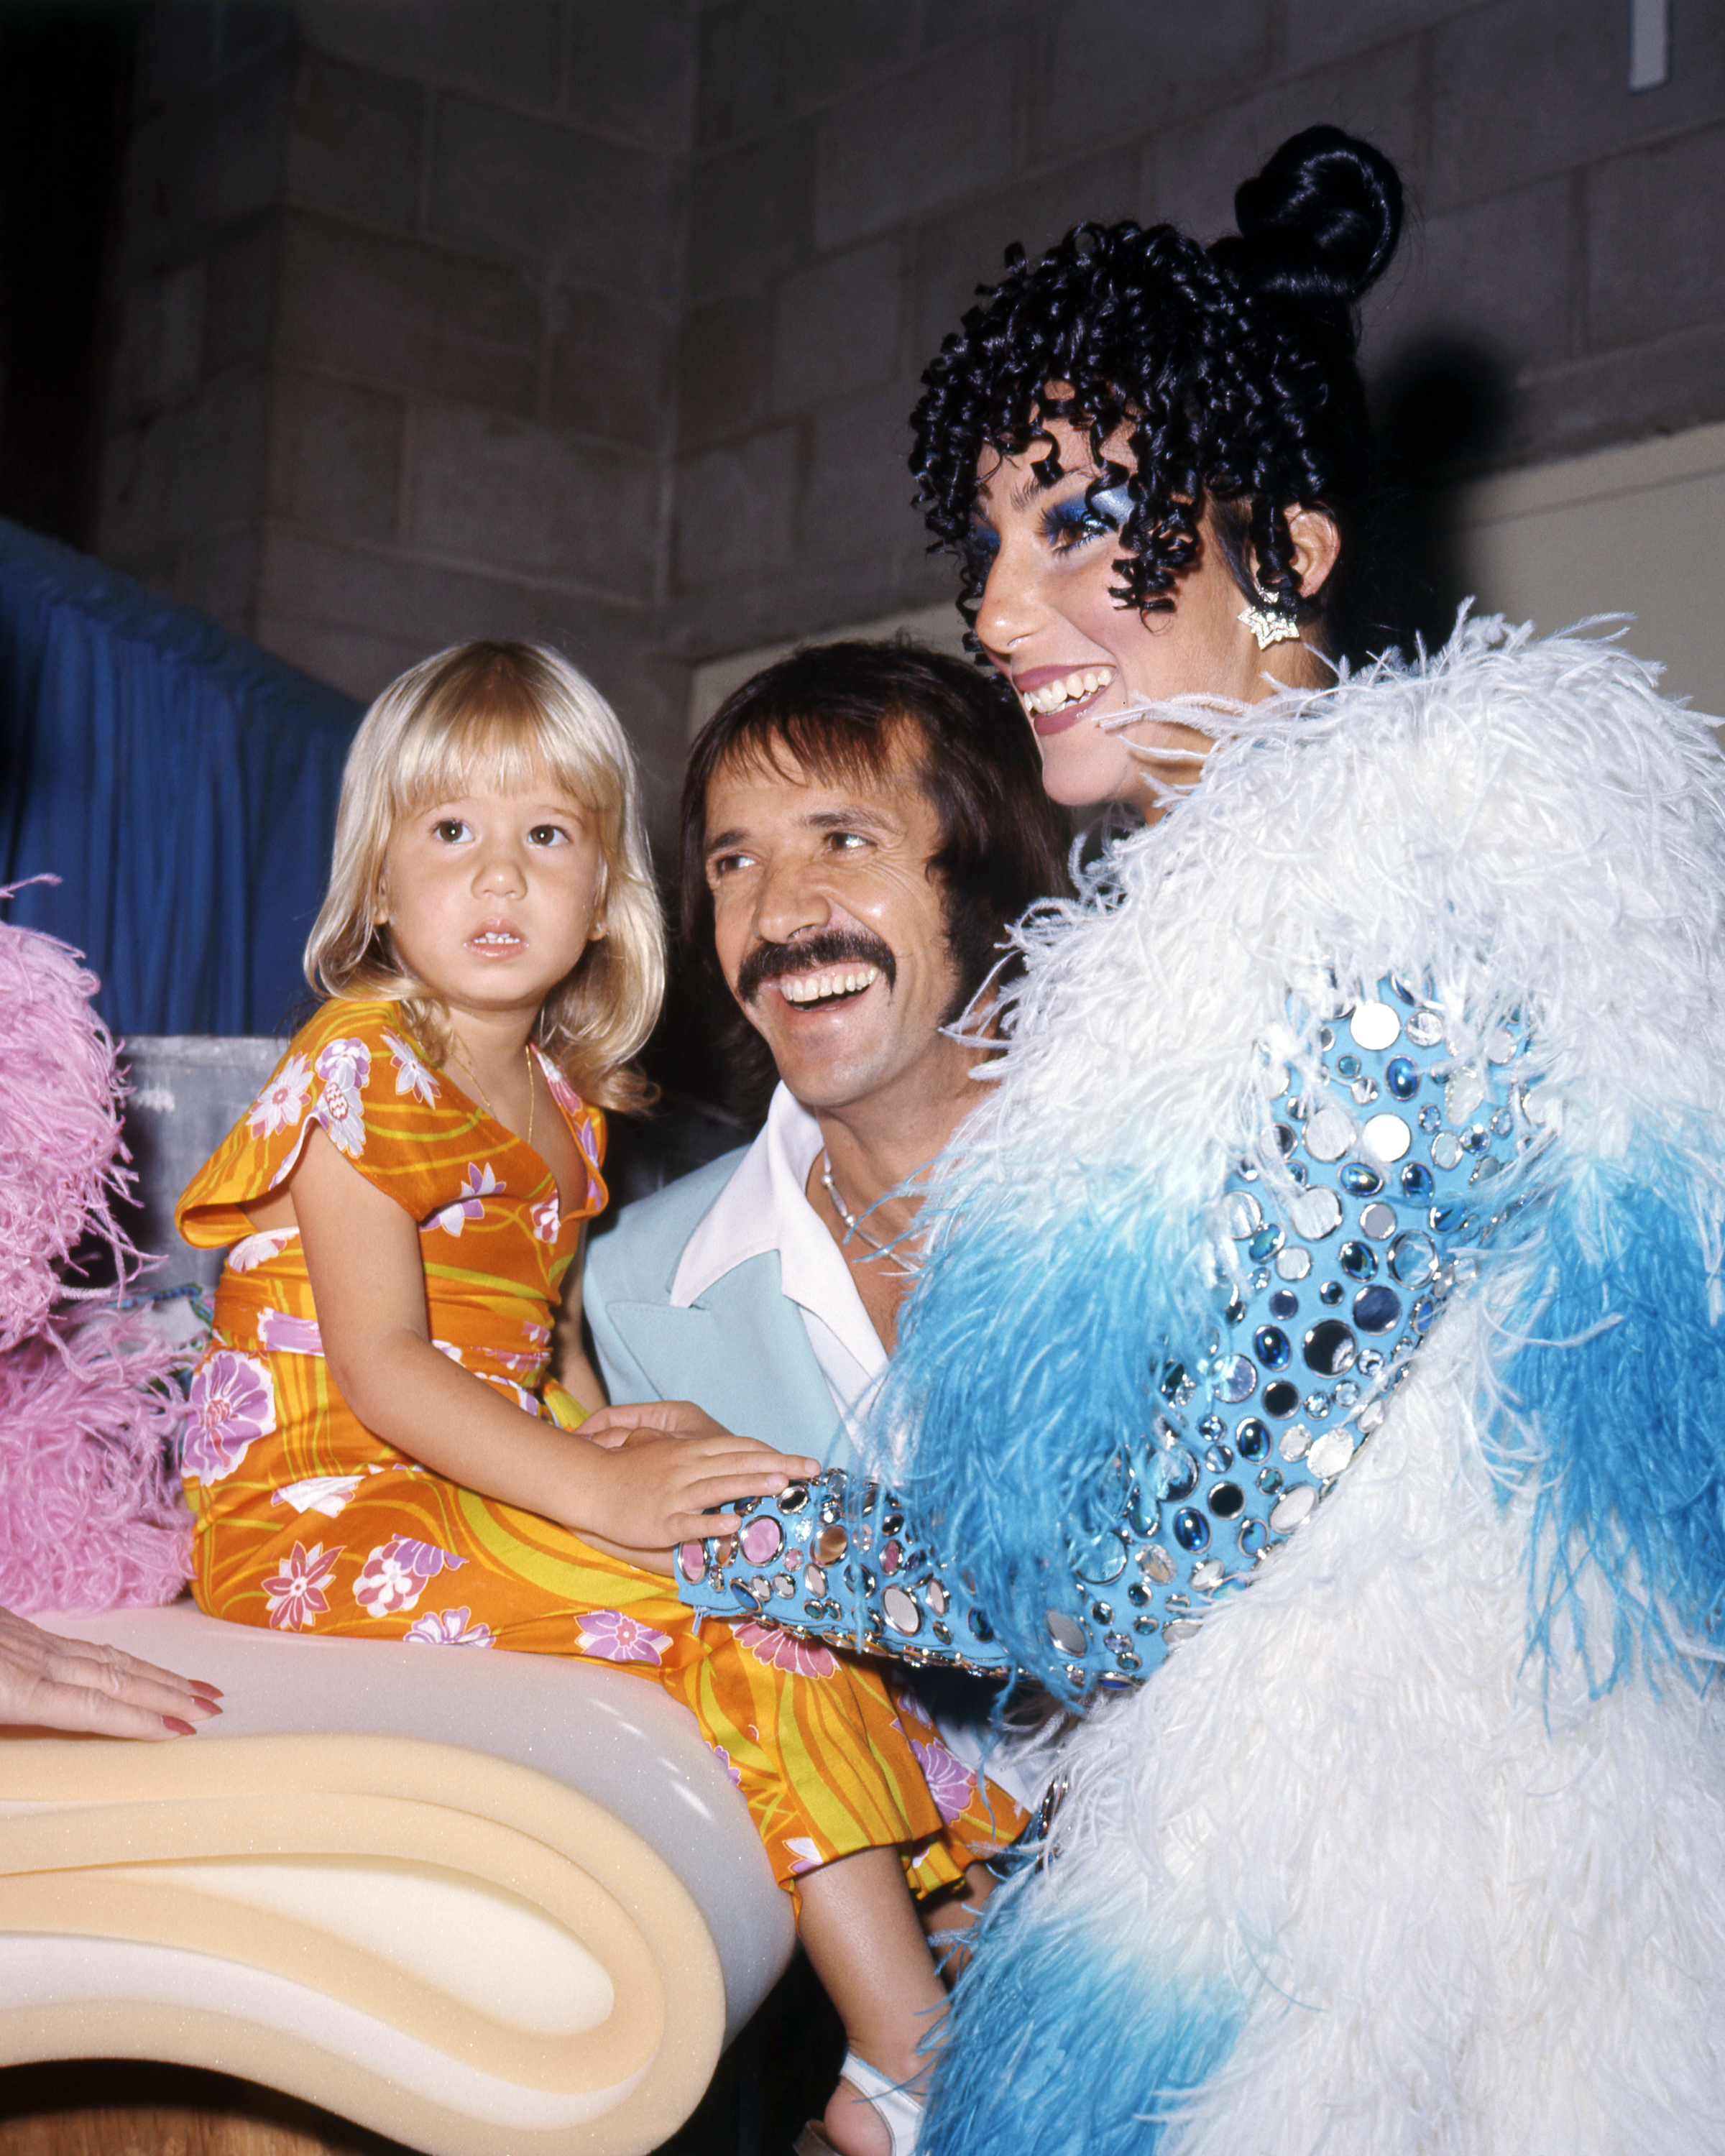 Sonny, Cher et Chastity Bono, vers 1973. | Source : Getty Images